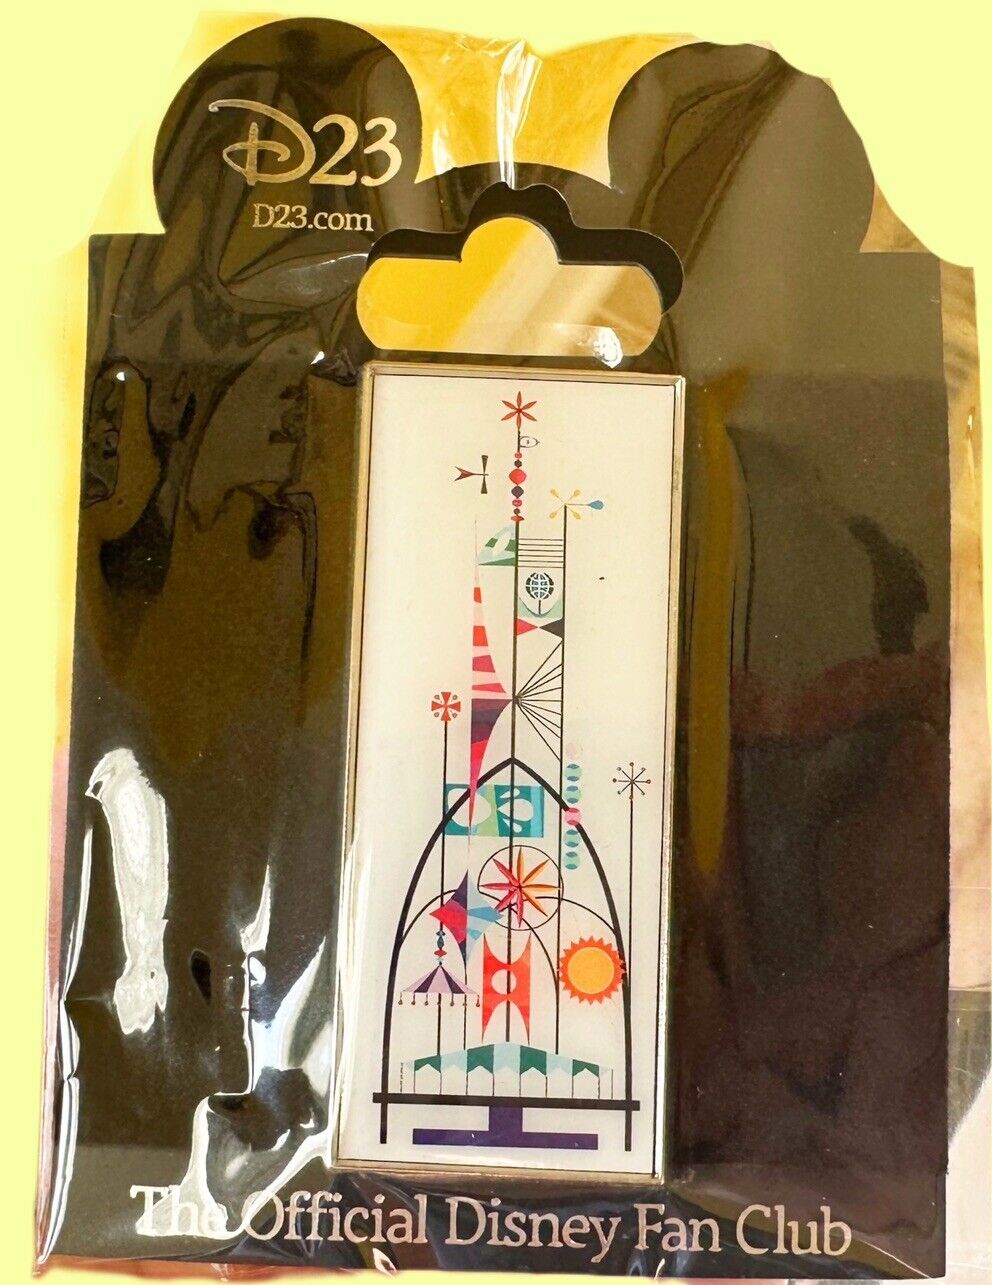 Tower of Four Winds 2014 Disney Destination D23 Attraction Rewind Pin RARE